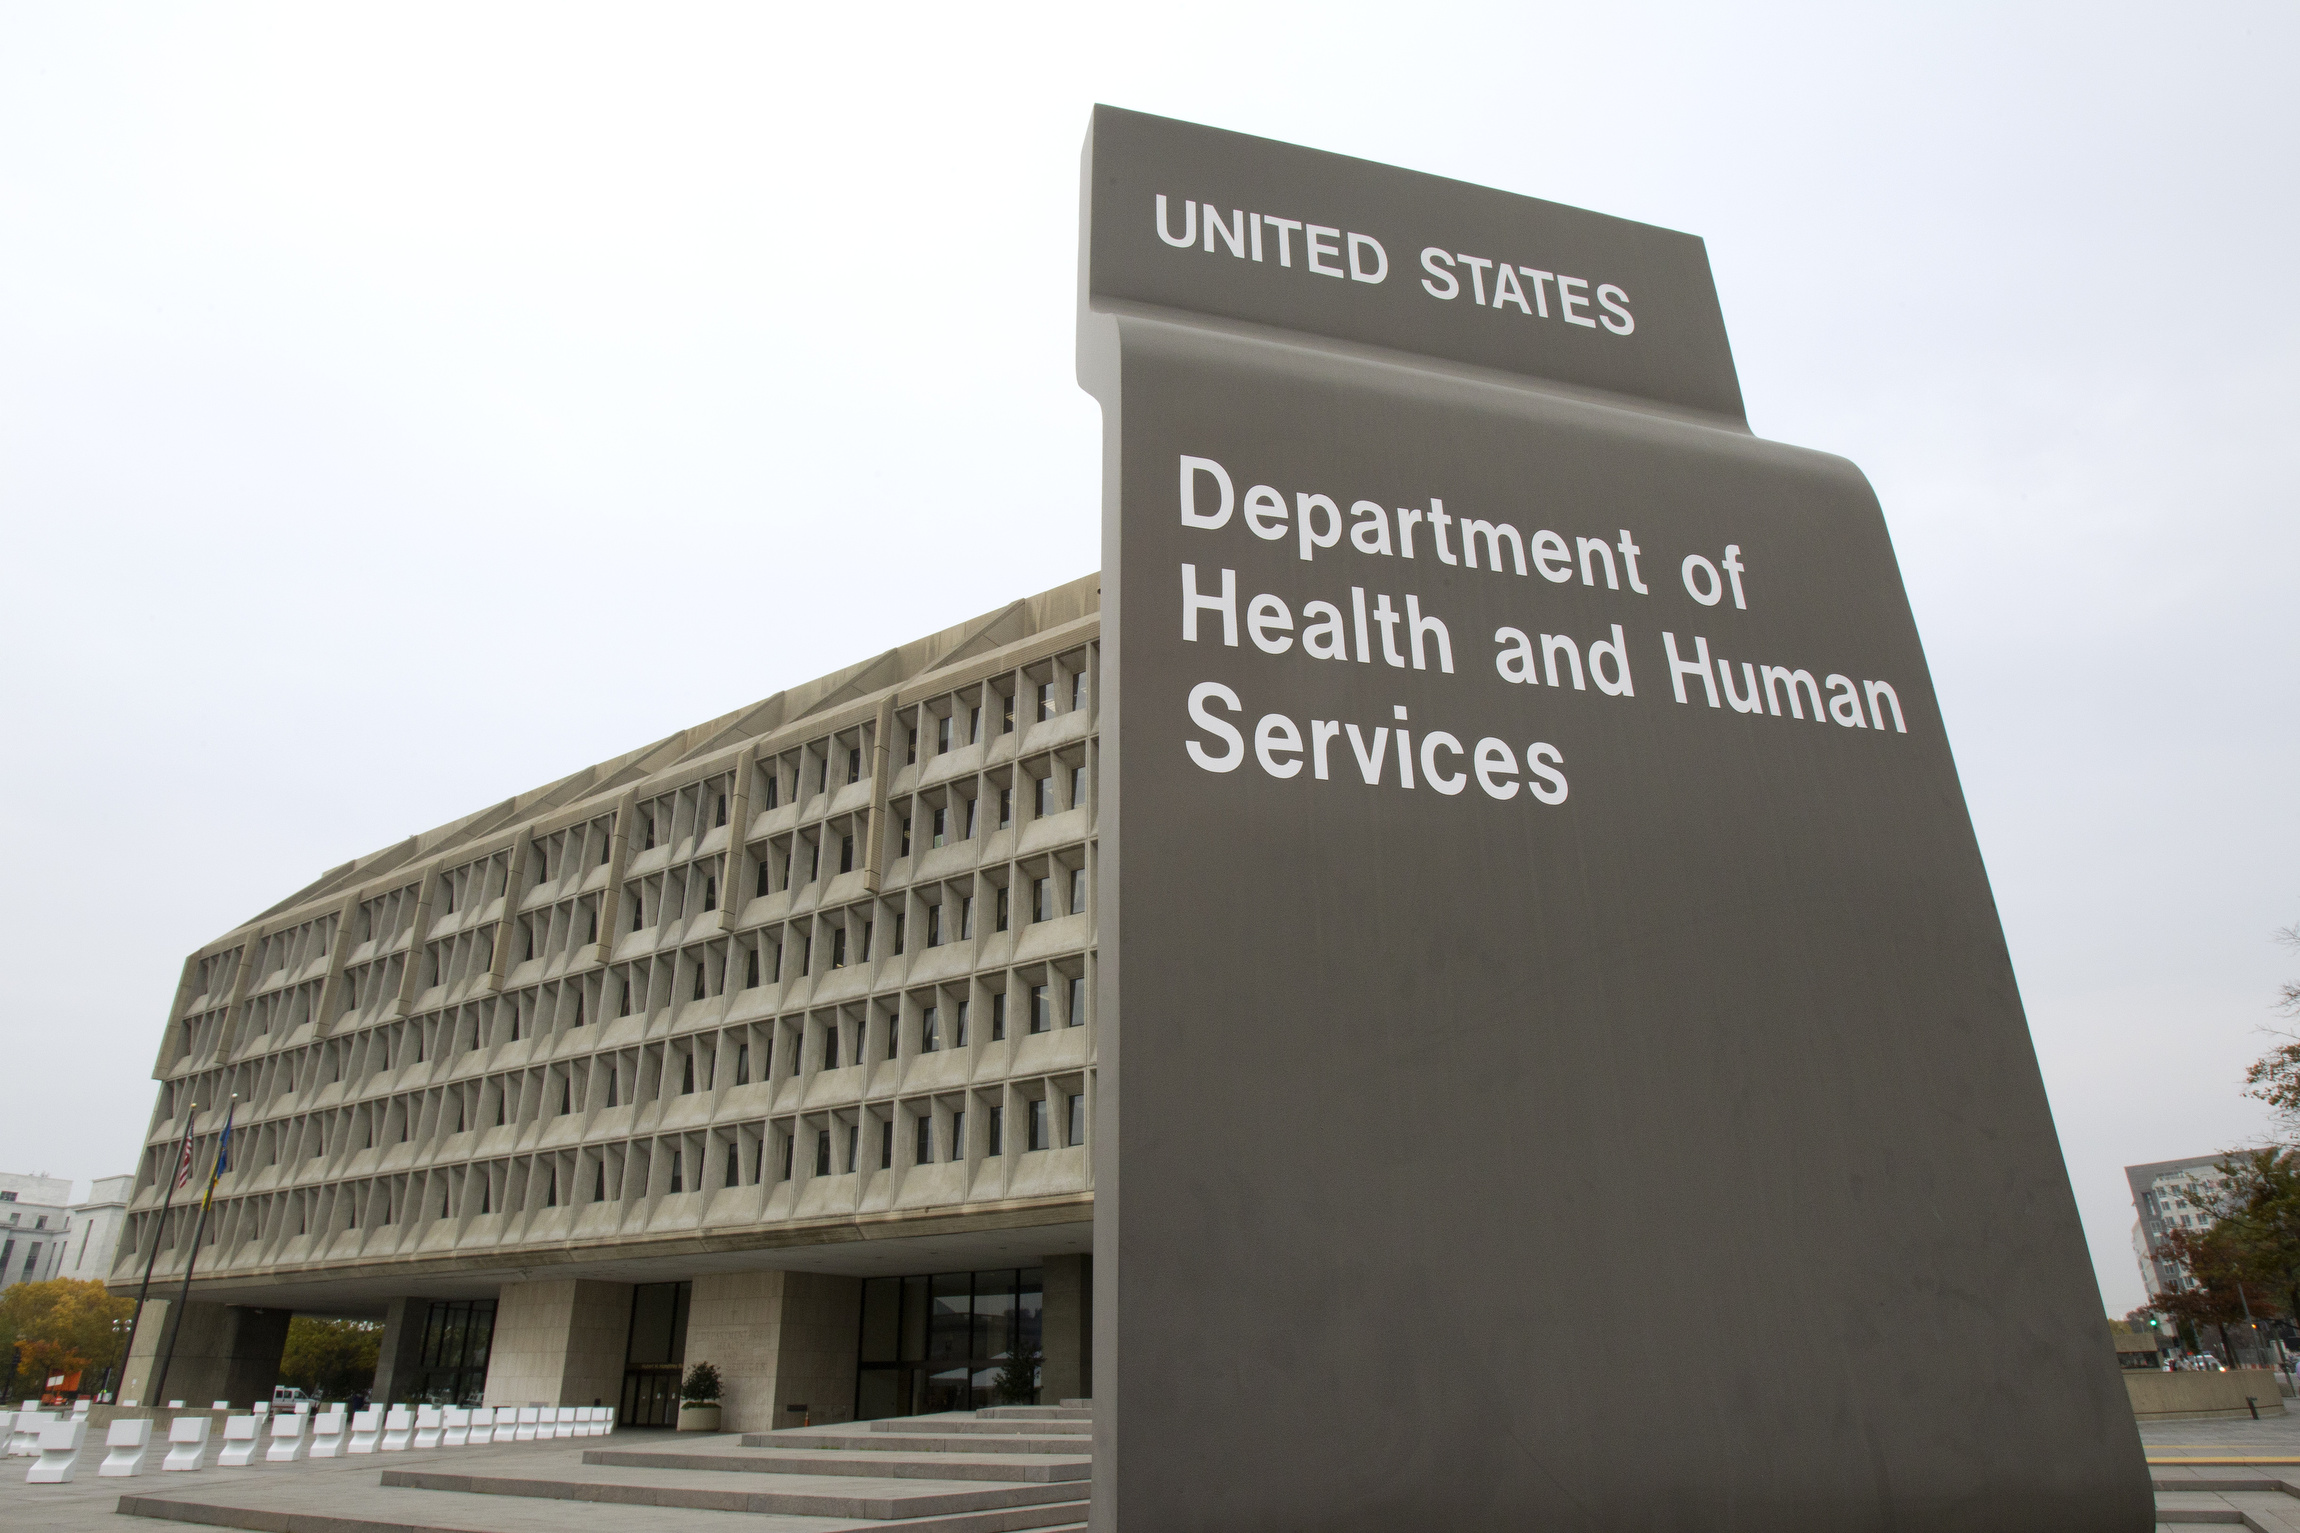 HEADQUARTERS OF U.S. DEPARTMENT OF HEALTH, HUMAN SERVICES